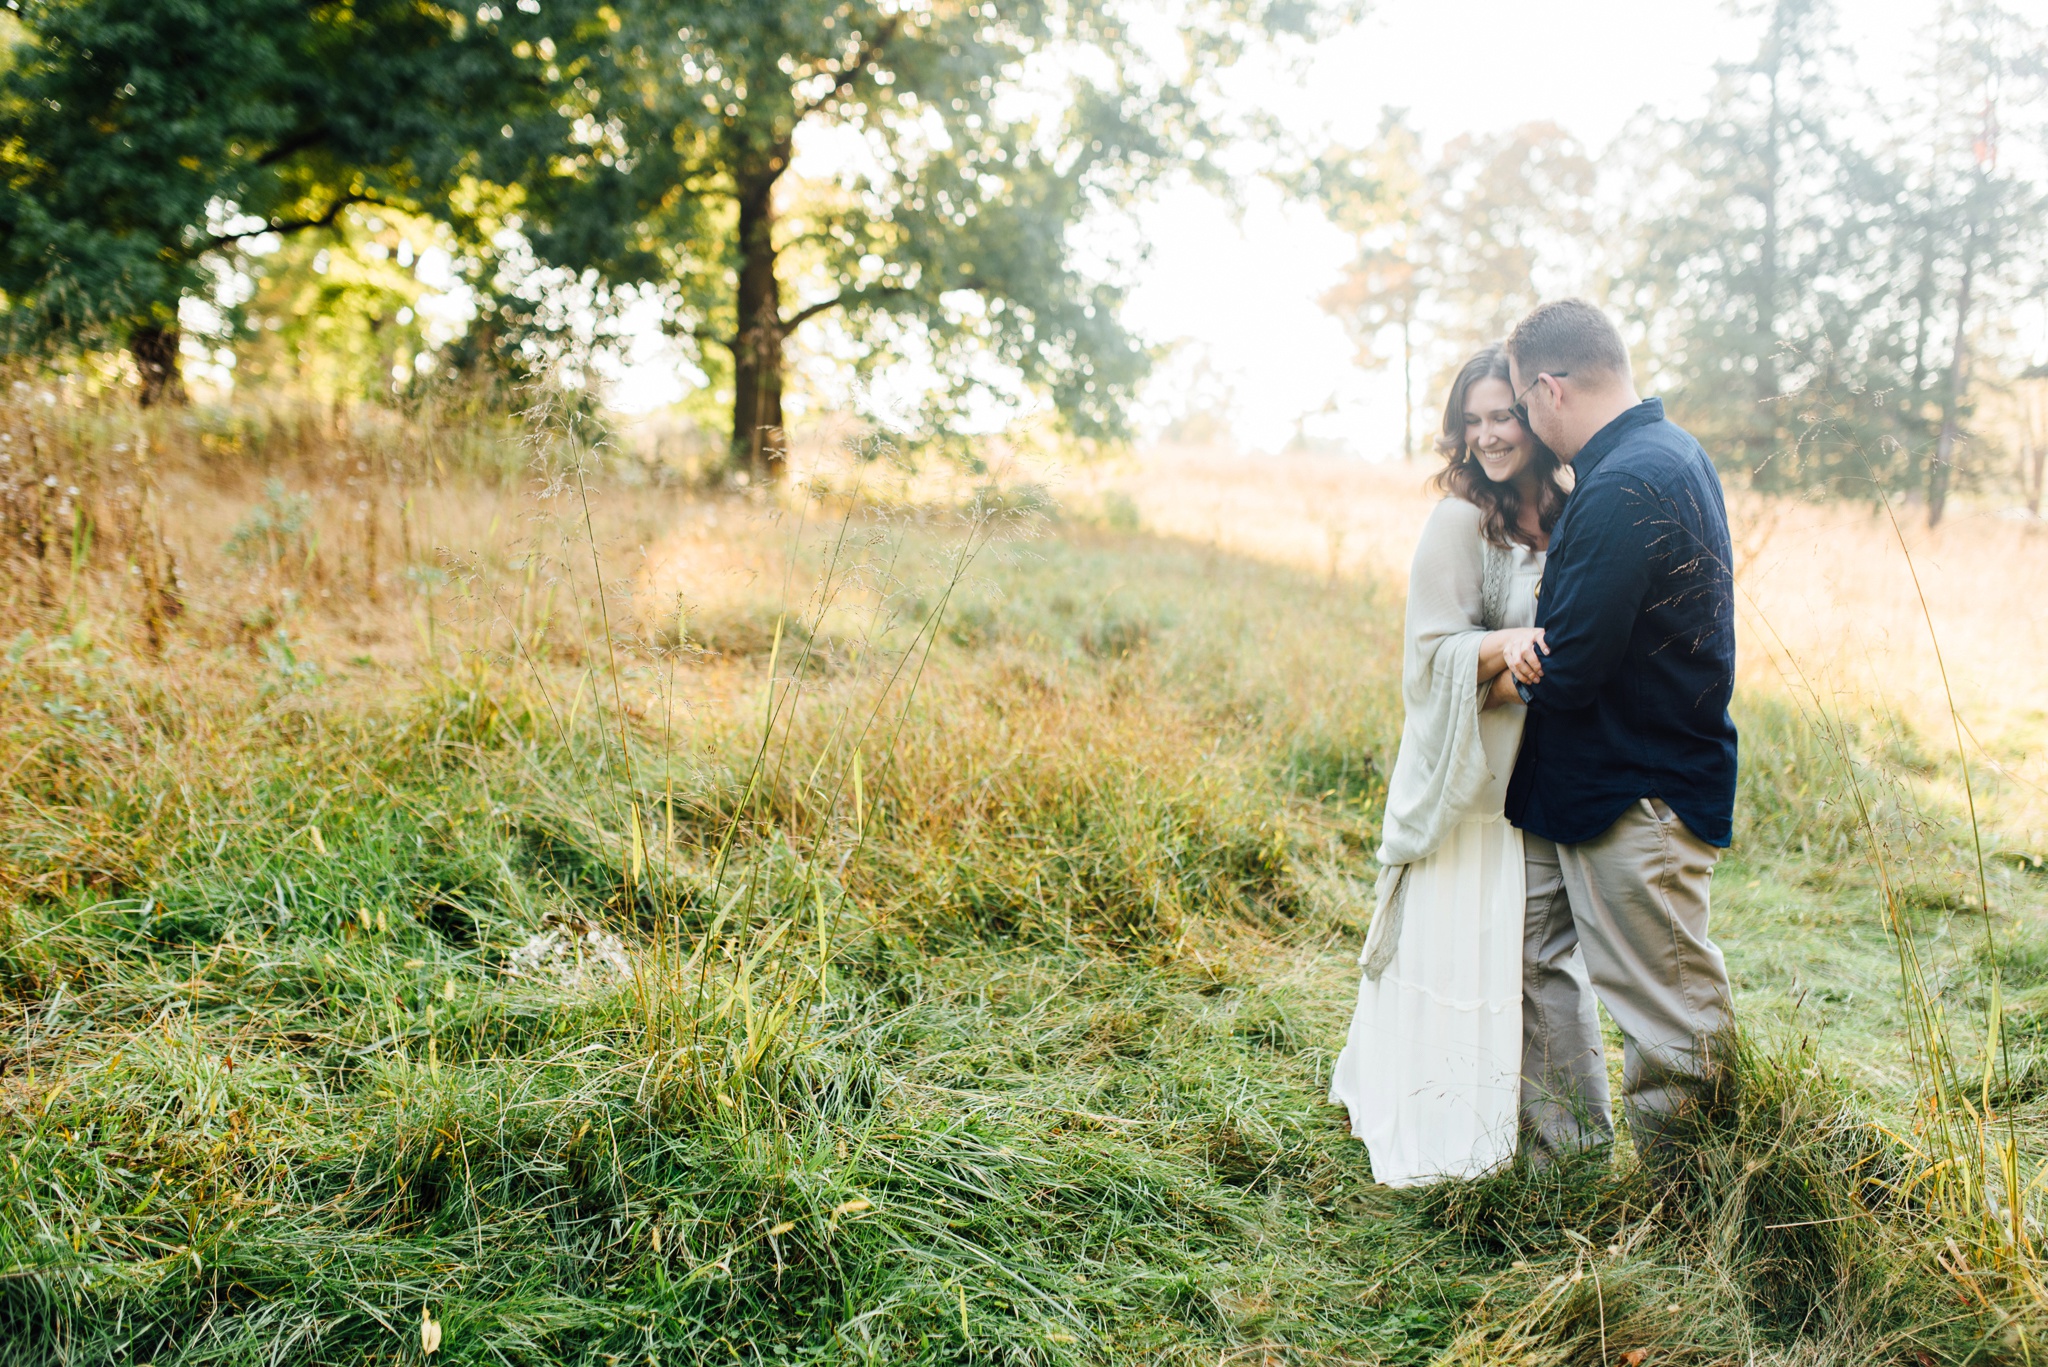 Aaren + Dave - Valley Forge Anniversary Session - Alison Dunn Photography photo